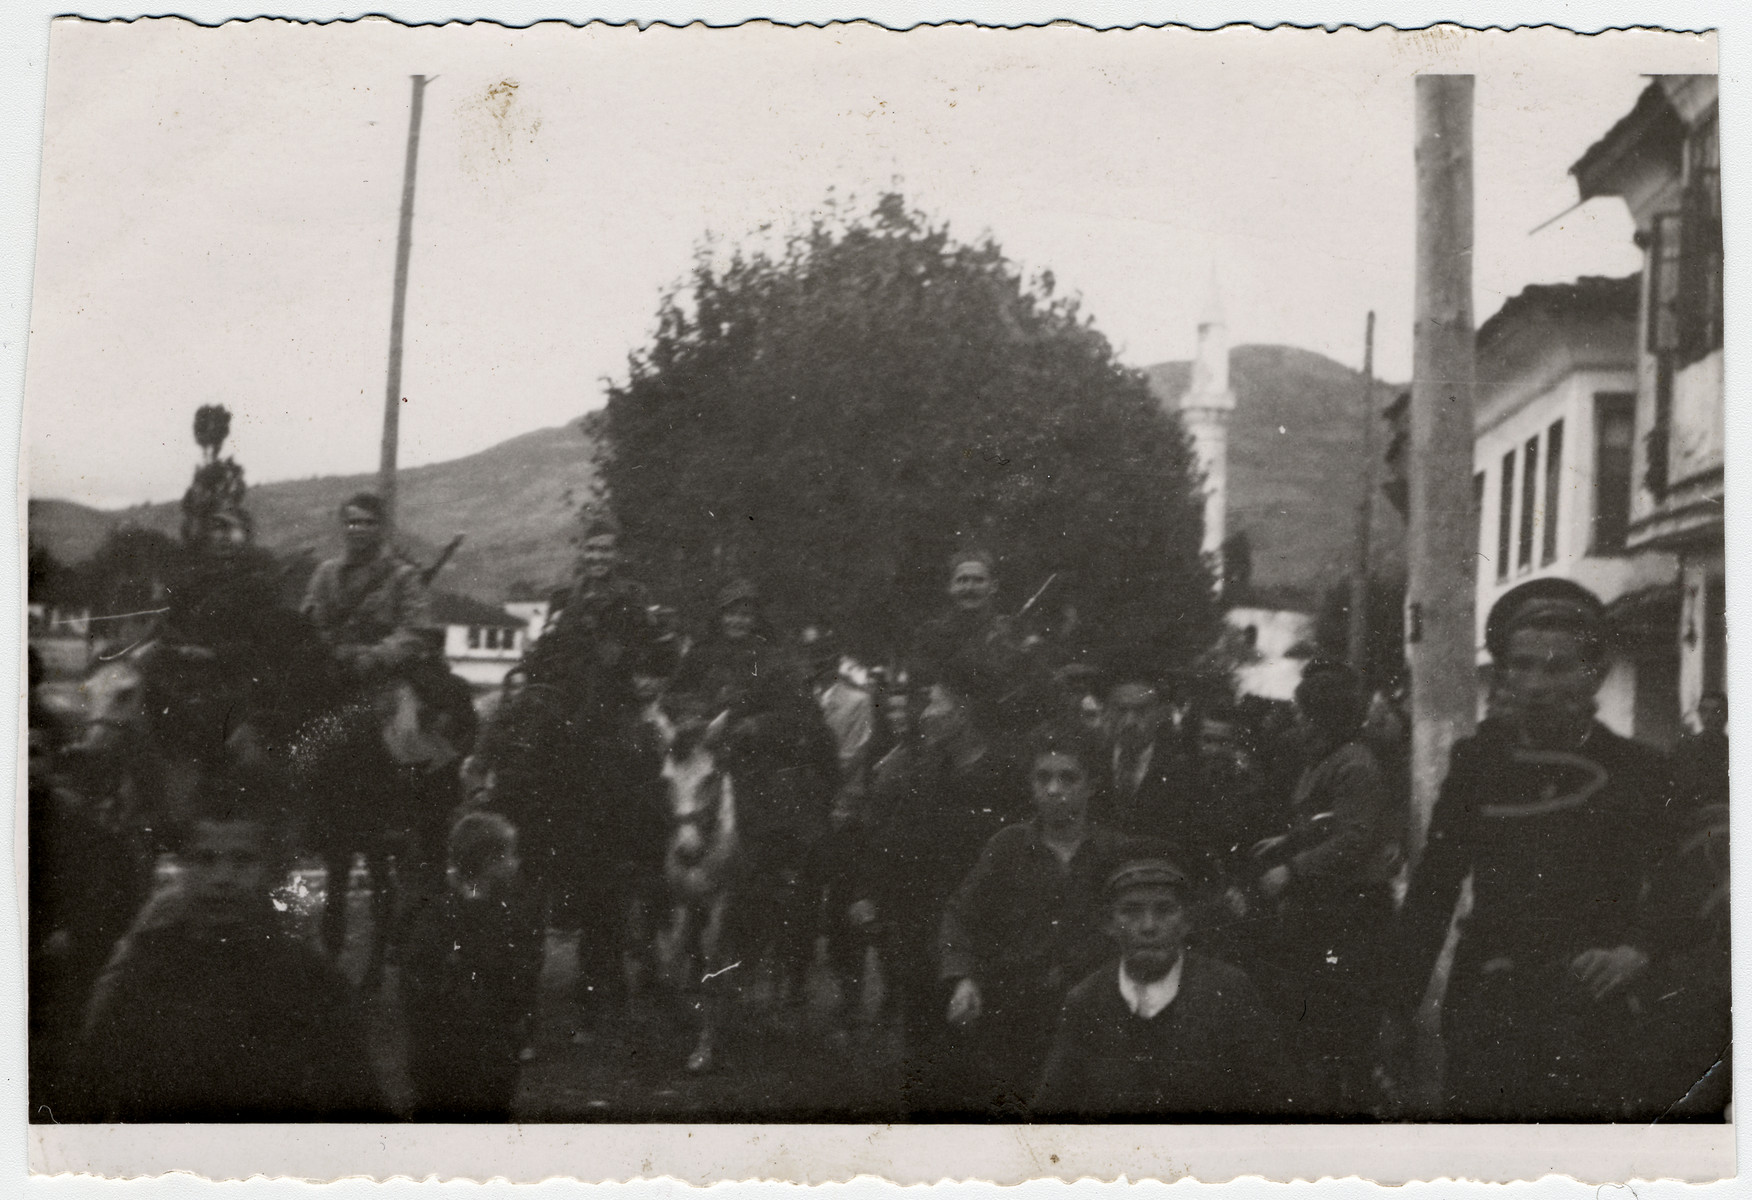 Partisans ride into the newly--liberated town of Struga, in southwestern Macedonia. 

Among those pictured are Jamila Kolonomos (center, on horseback) and Chede Filipovski (first on the left).